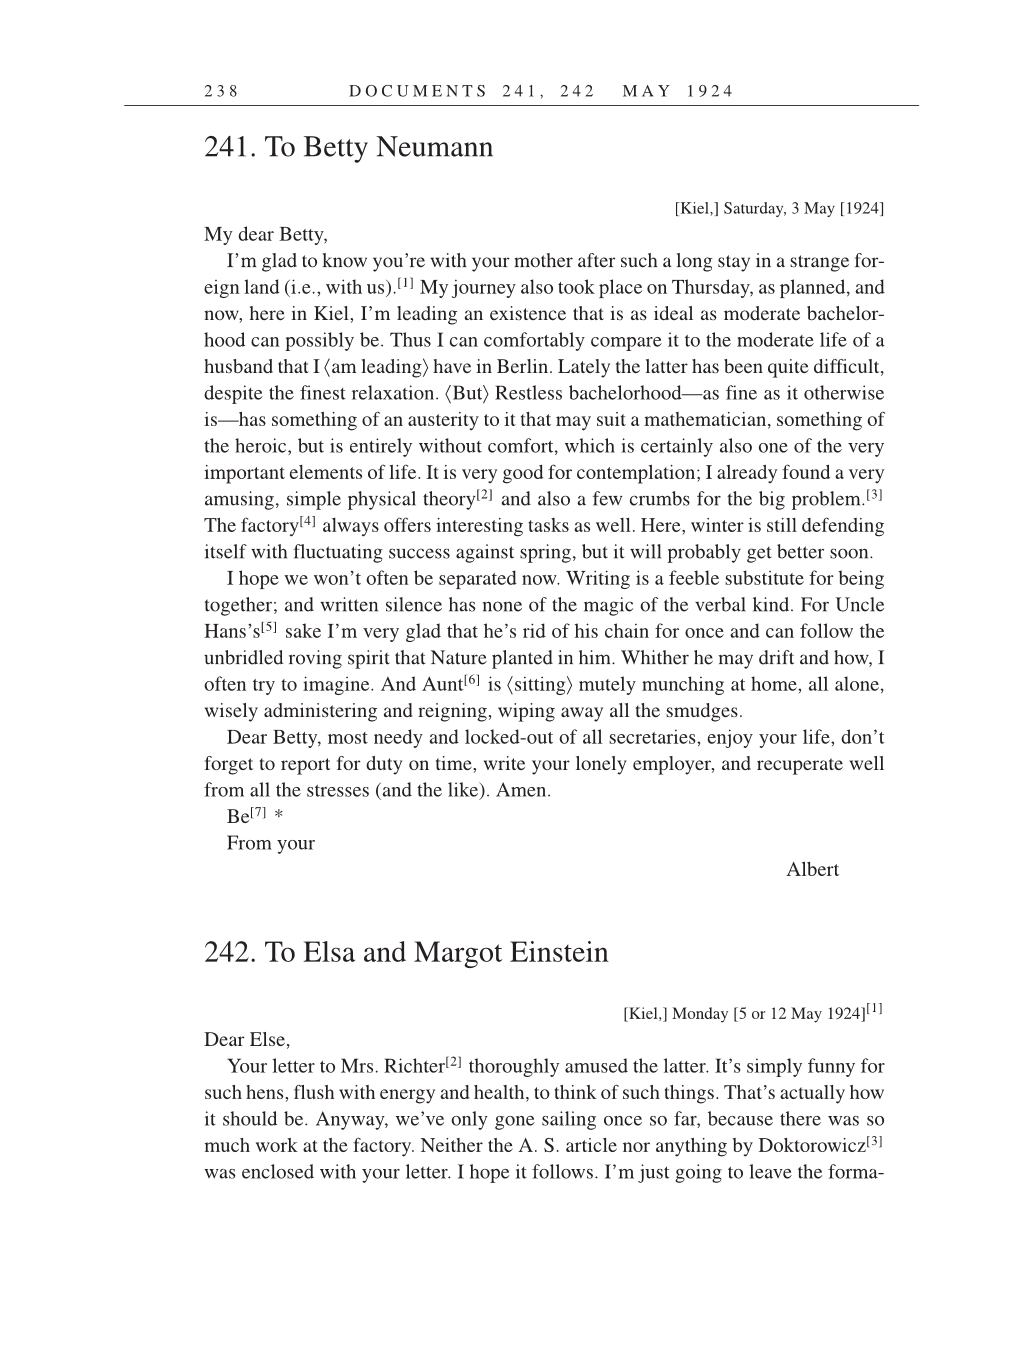 Volume 14: The Berlin Years: Writings & Correspondence, April 1923-May 1925 (English Translation Supplement) page 238